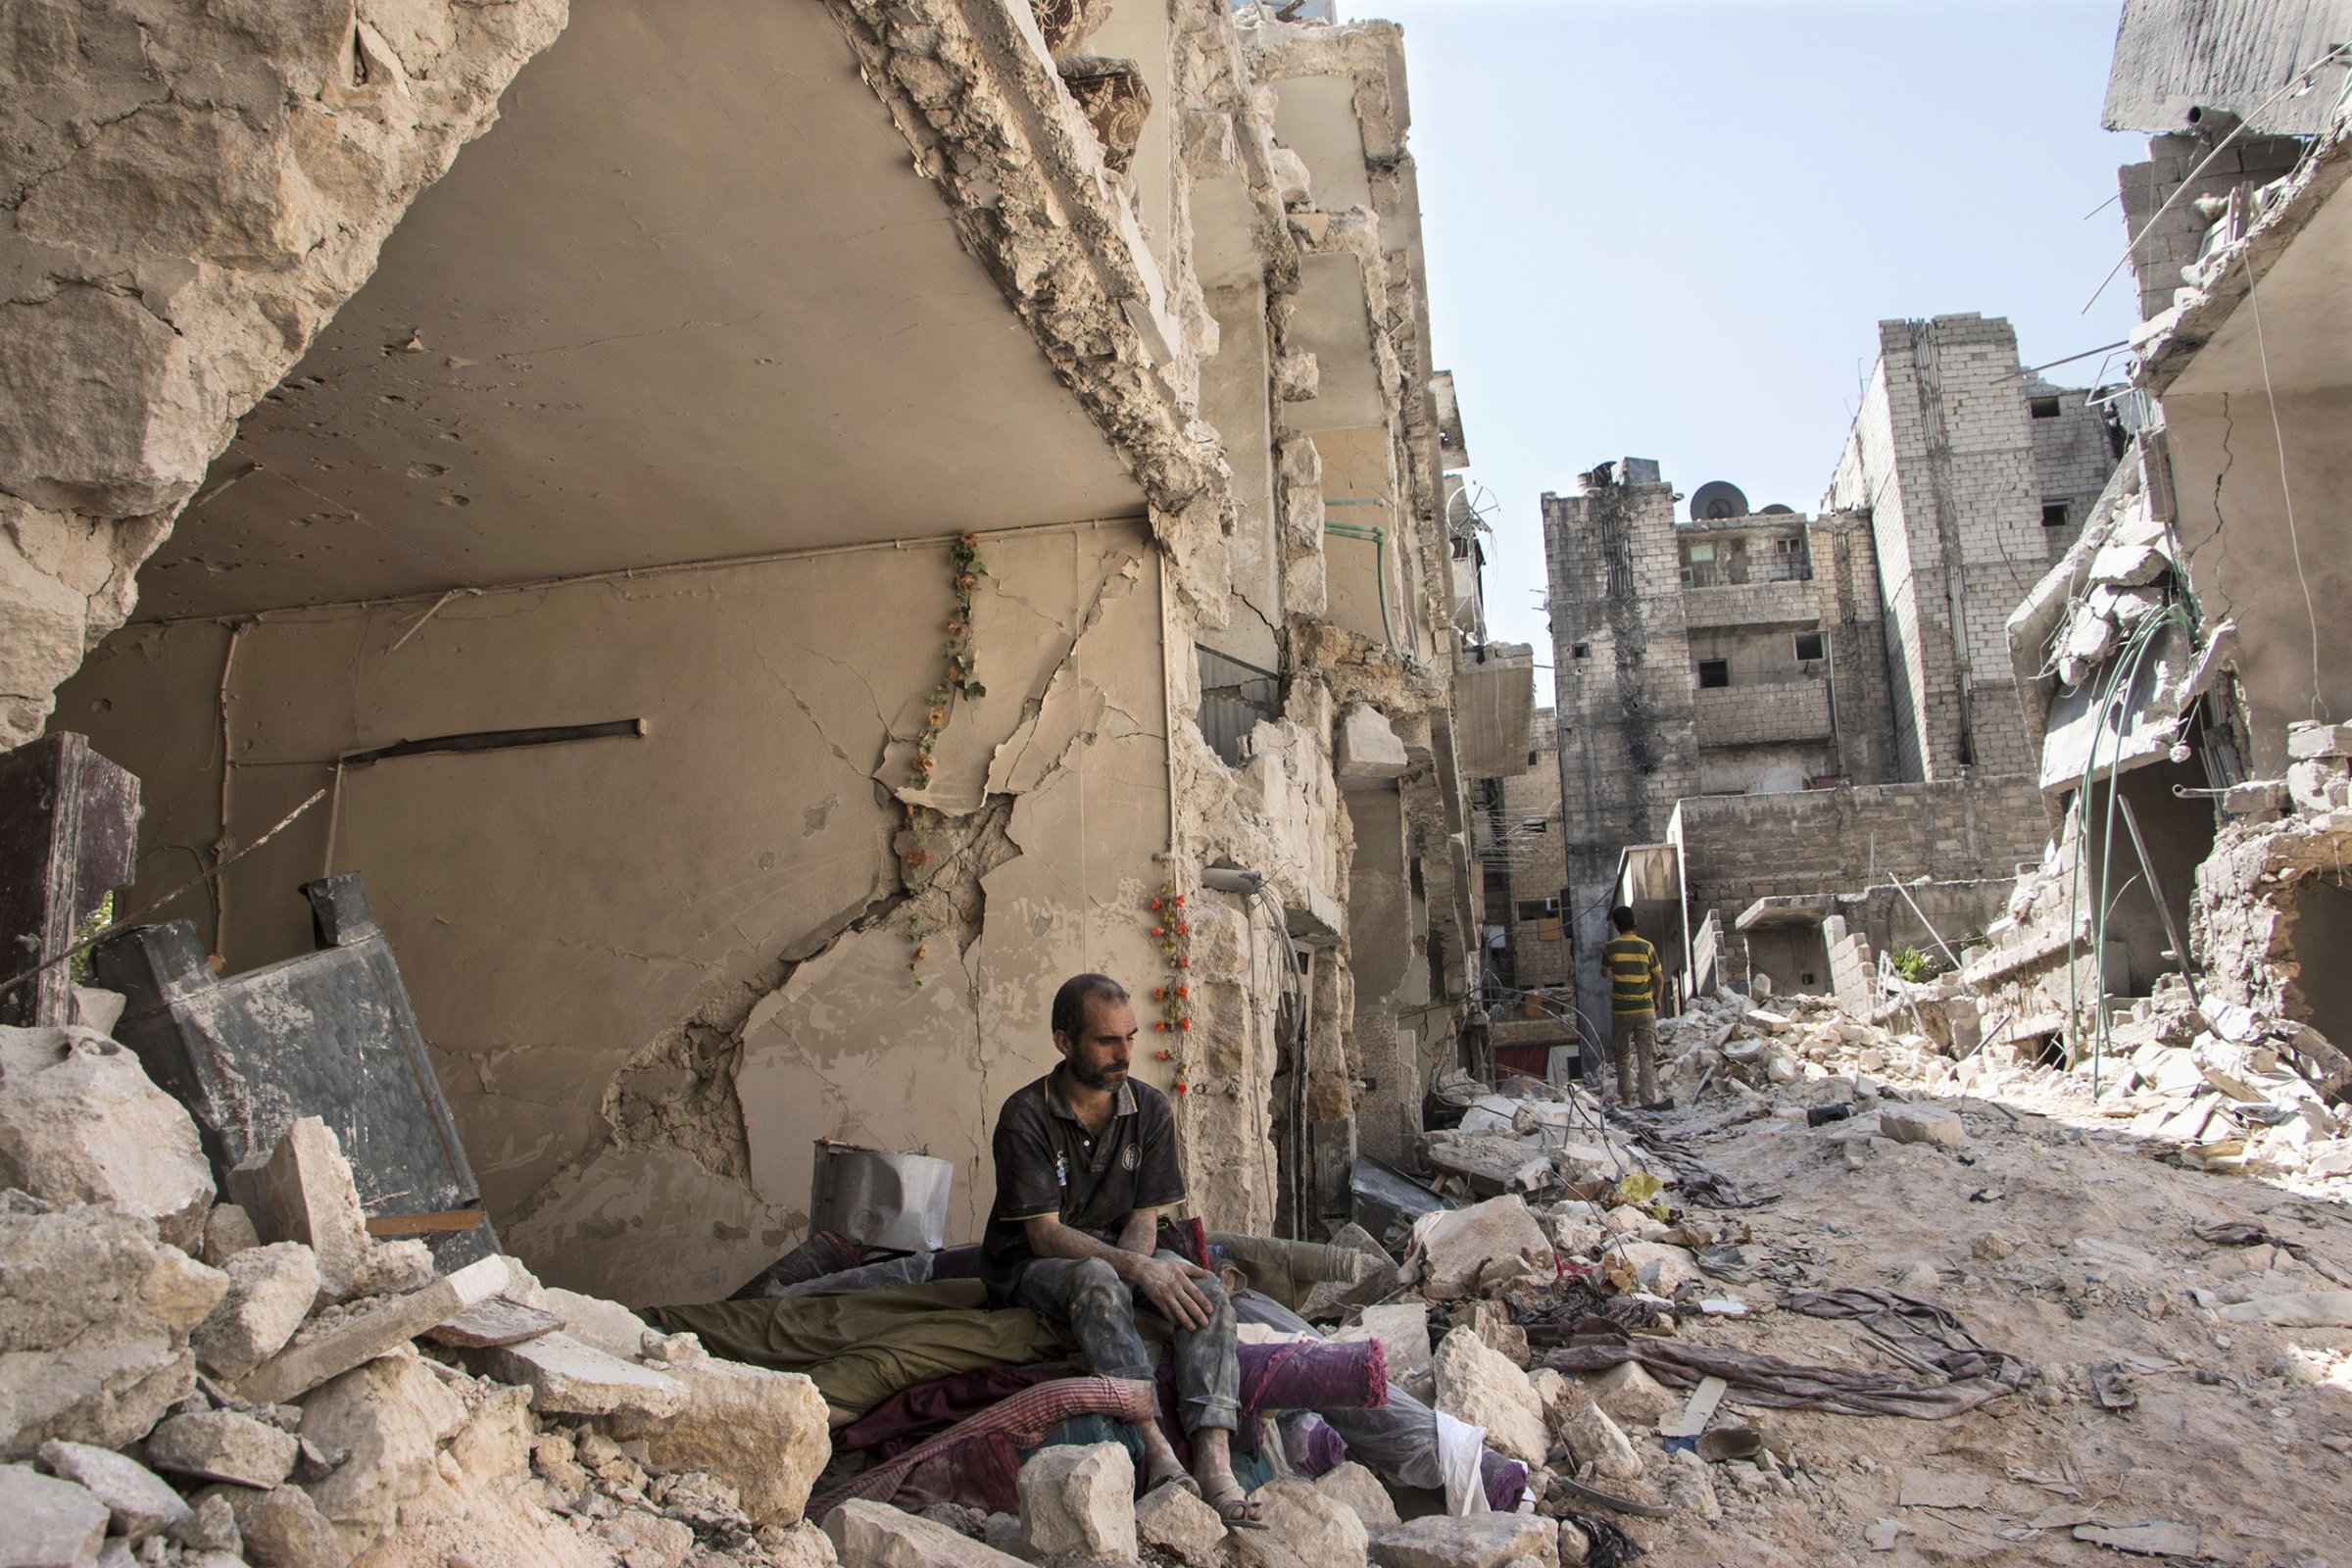 A Syrian man sits in the rubble following a barrel bomb attack the previous day on the rebel-held neighborhood of al-Mashad in Aleppo on Sept. 17, 2015.